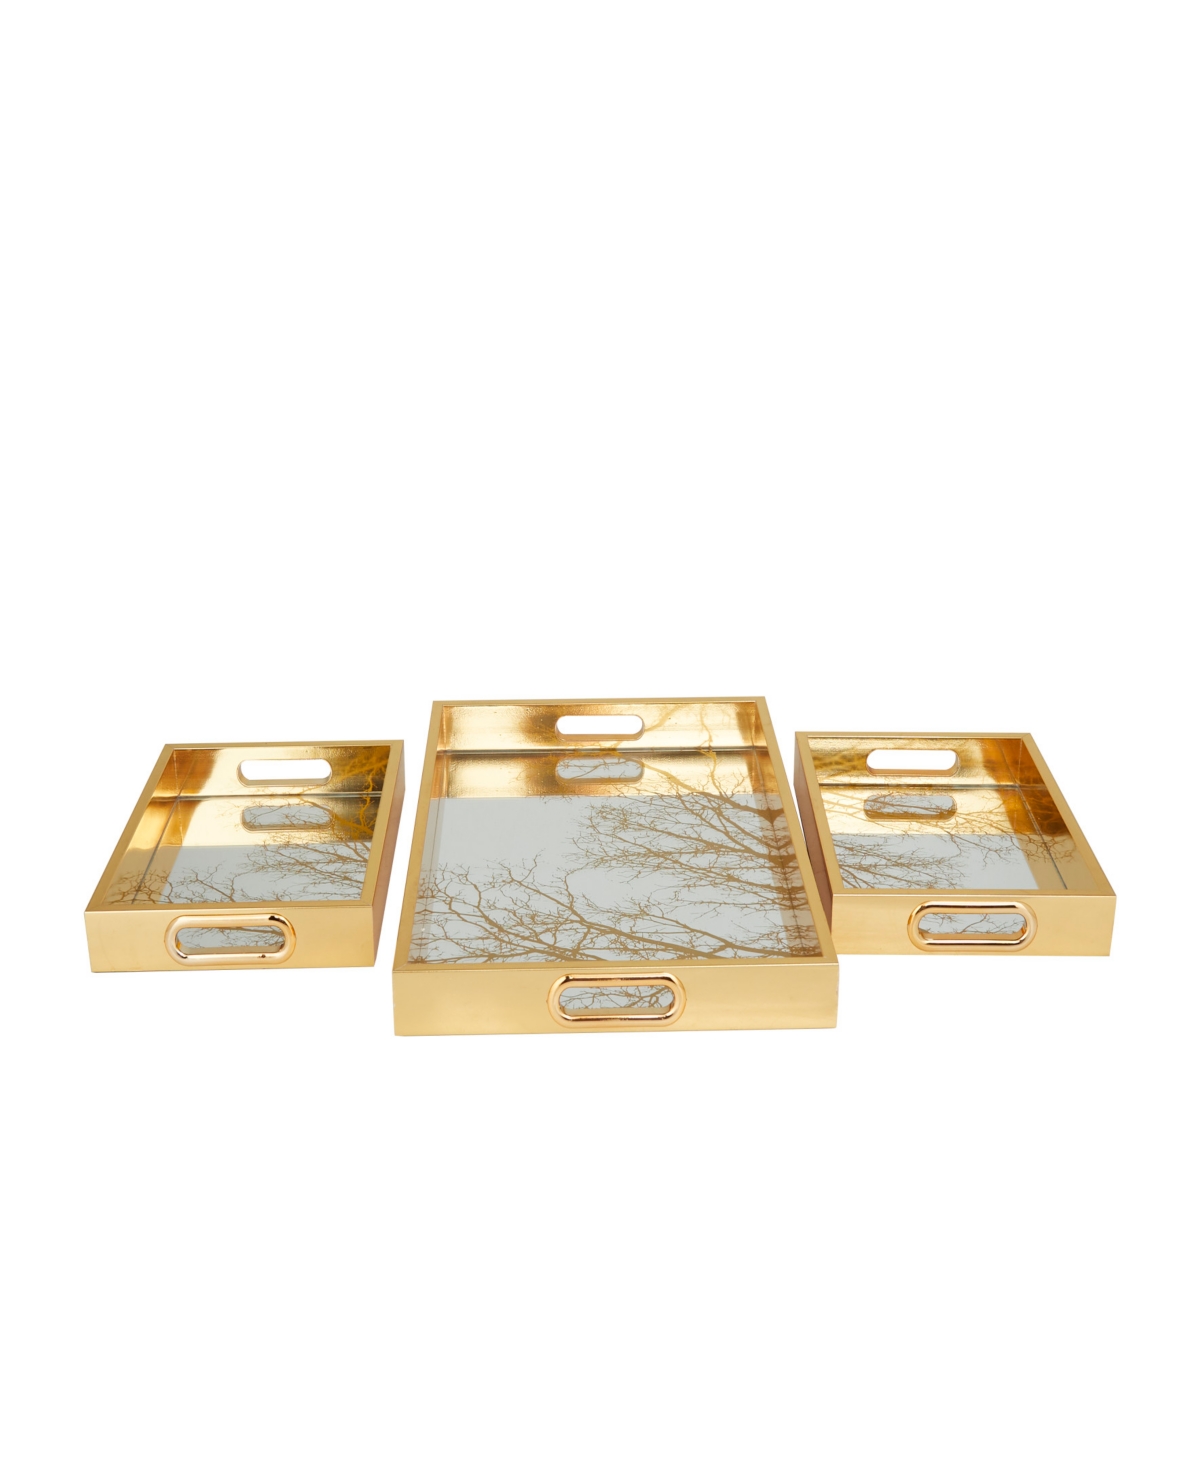 Rosemary Lane Plastic Mirrored Geometric Tray, Set Of 3, 18", 11", 11" W In Gold